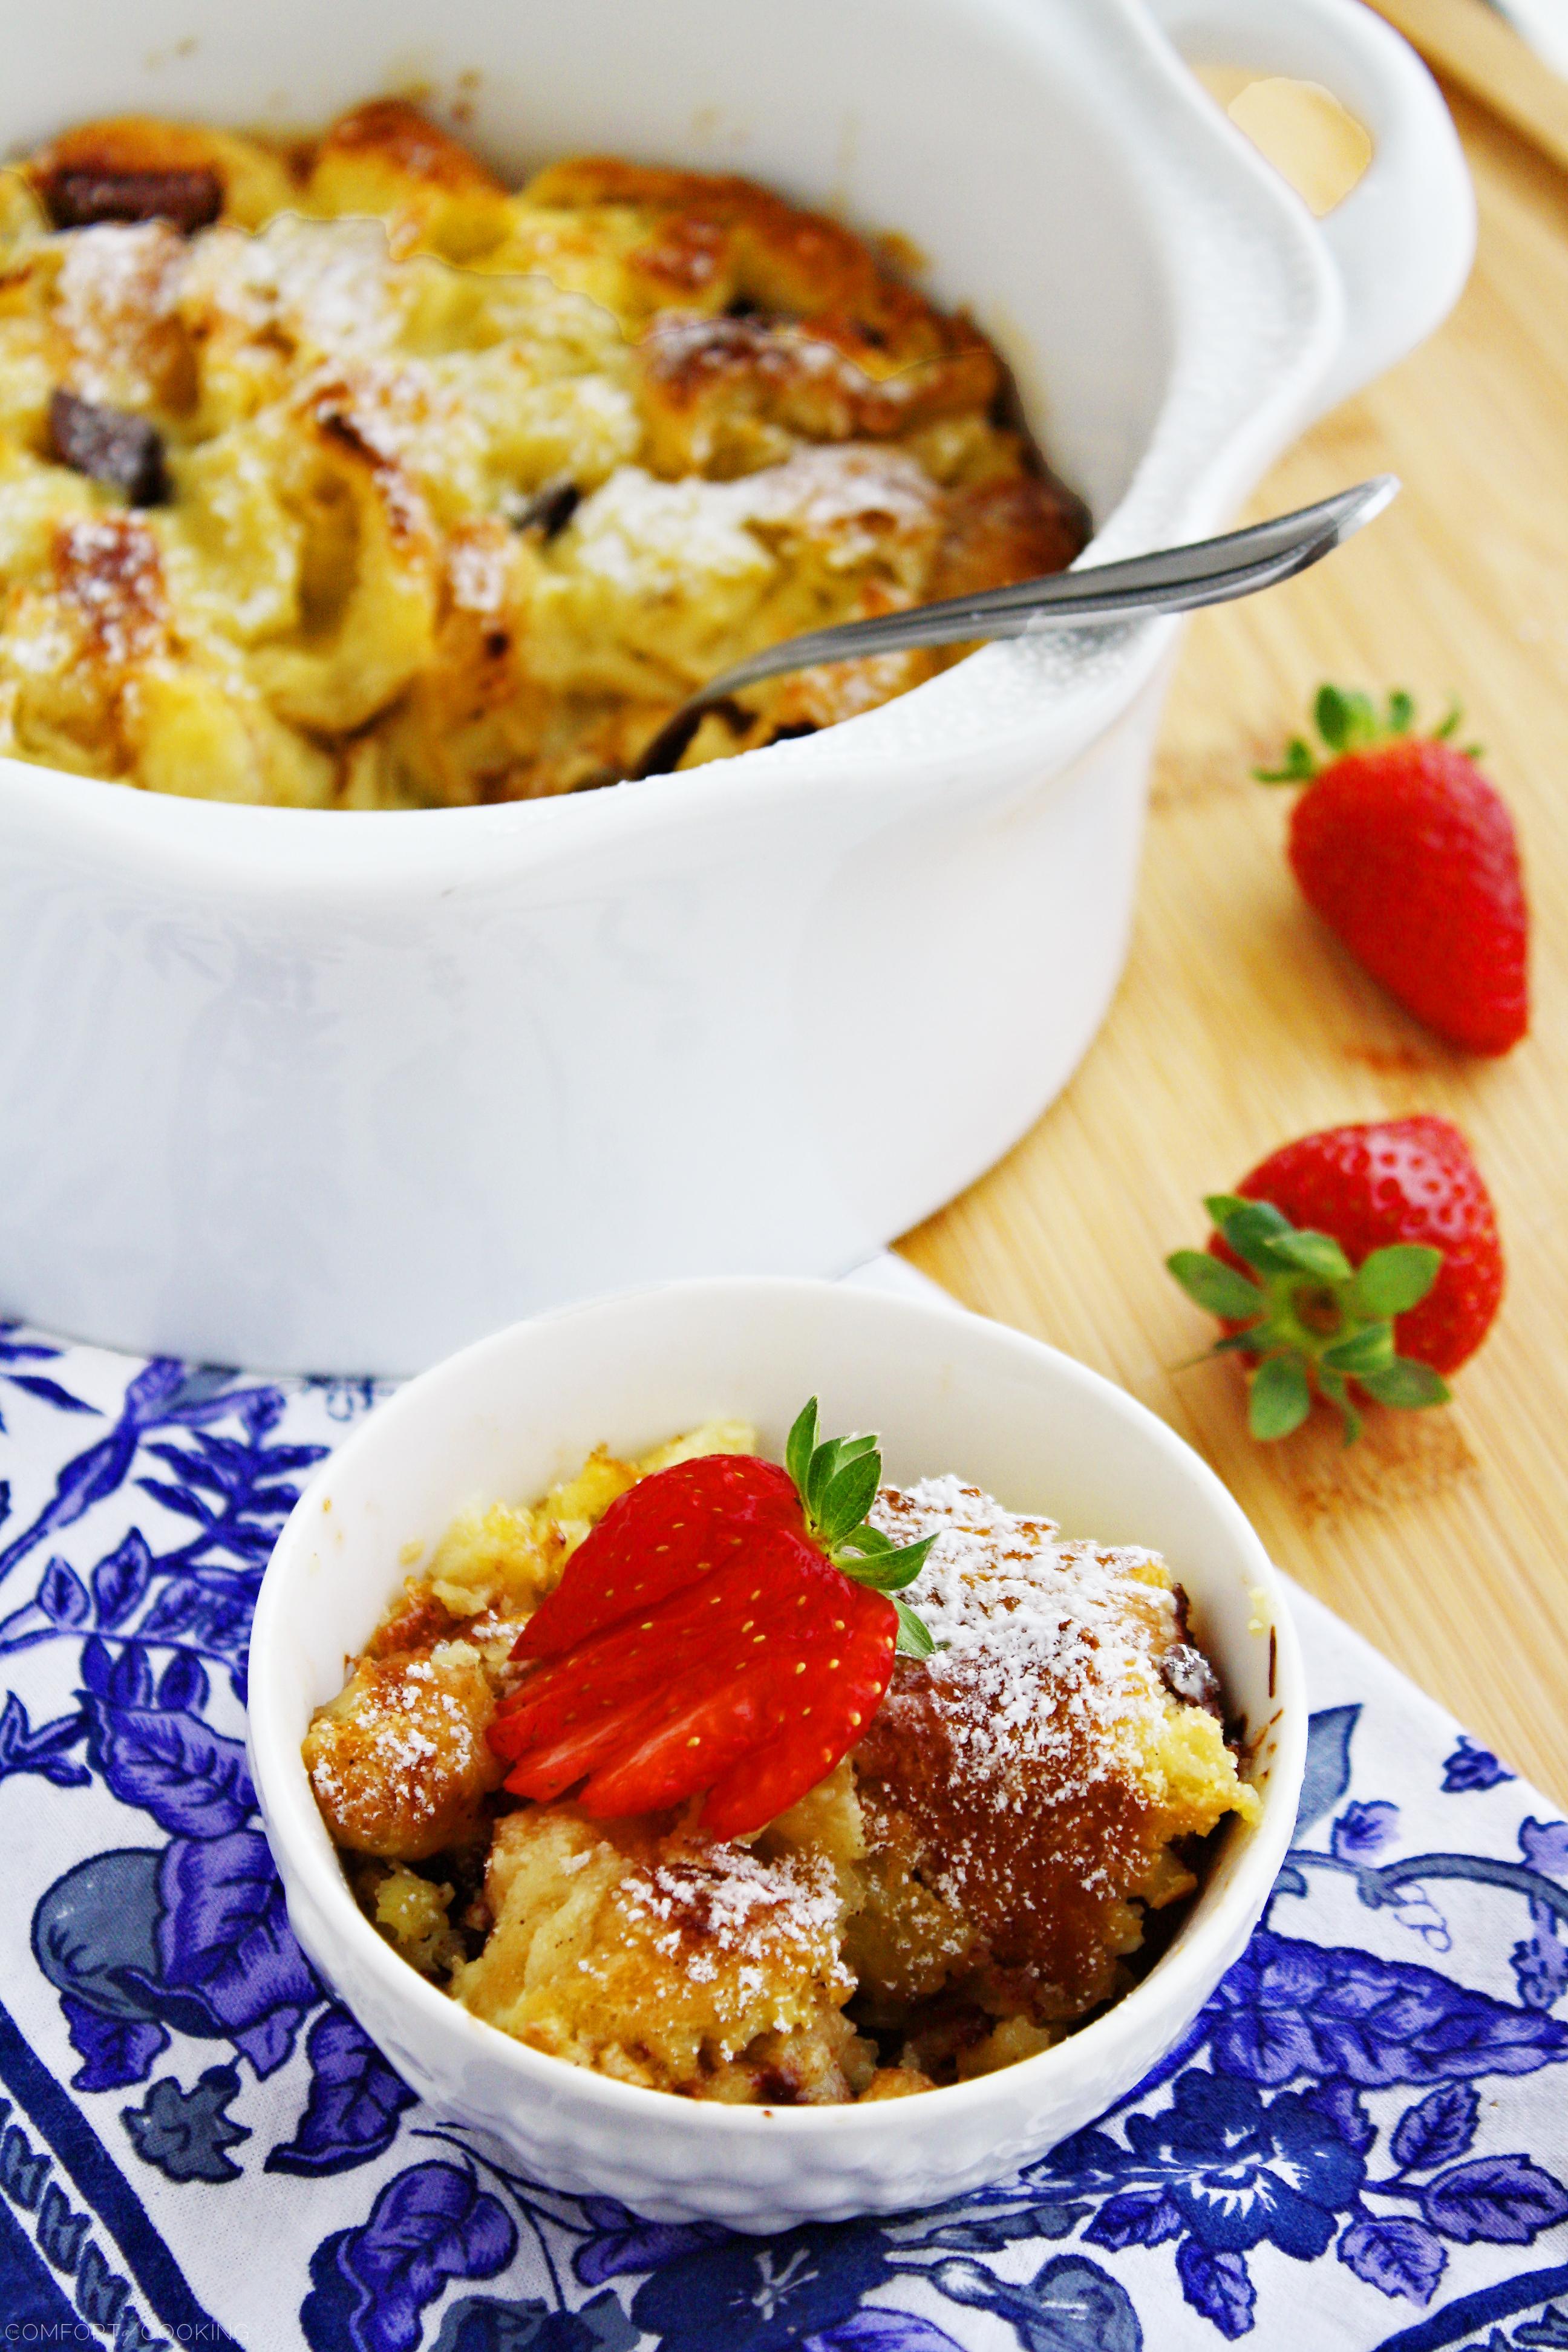 Croissant and Chocolate Bread Pudding